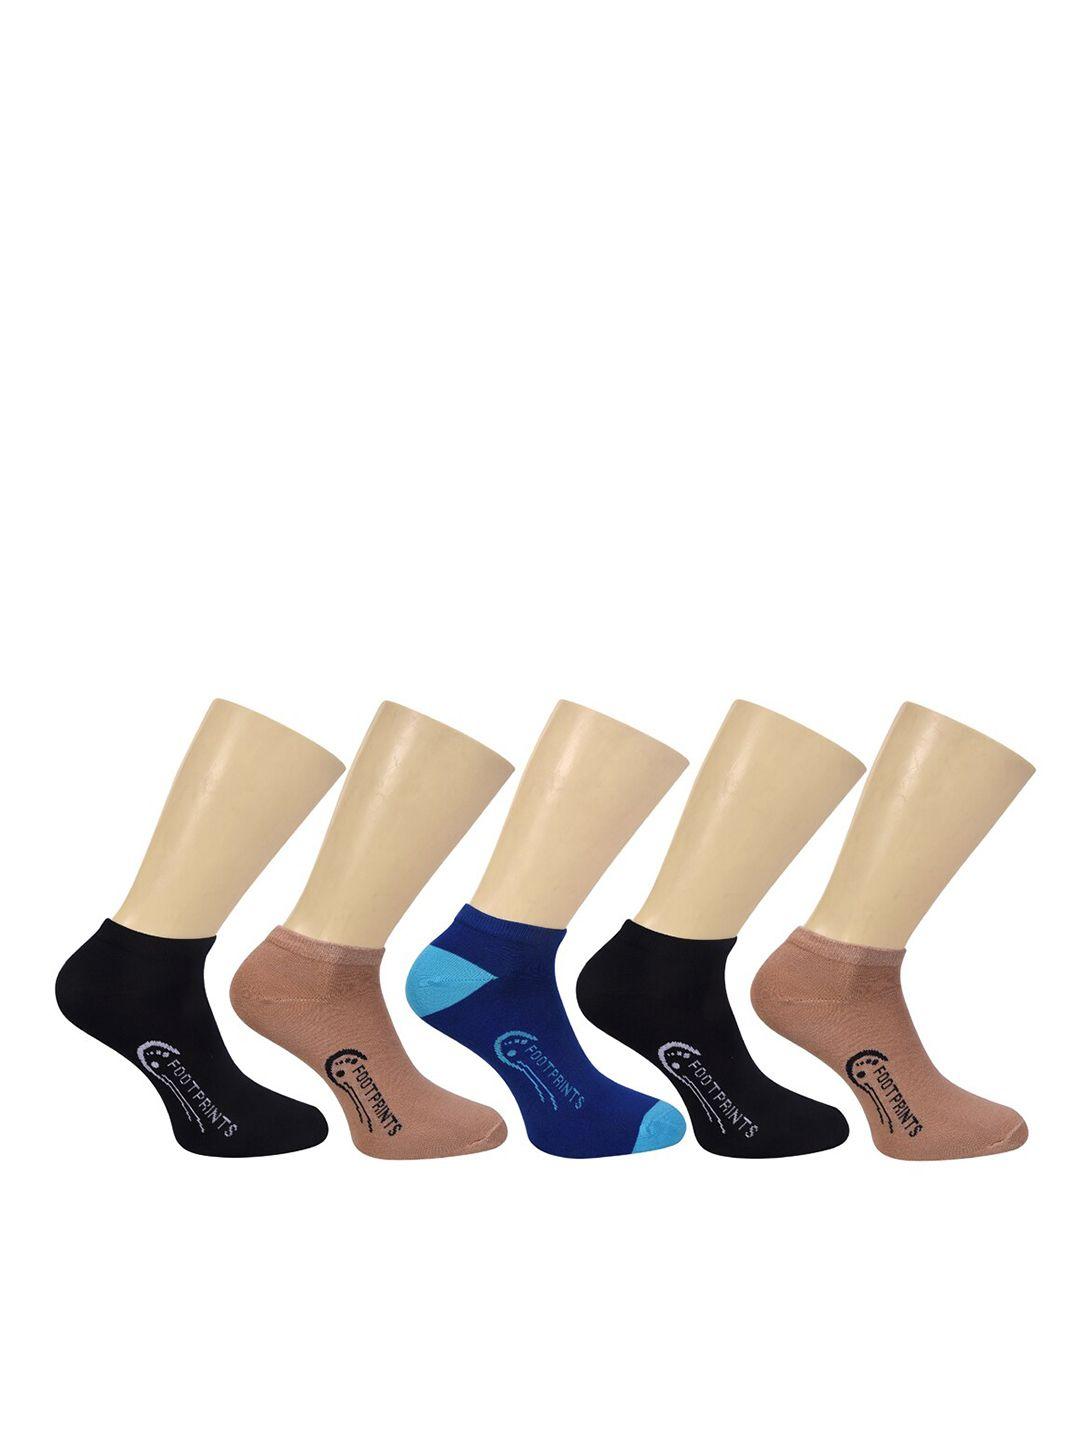 footprints pack of 5 organic cotton & bamboo ankle length casual socks